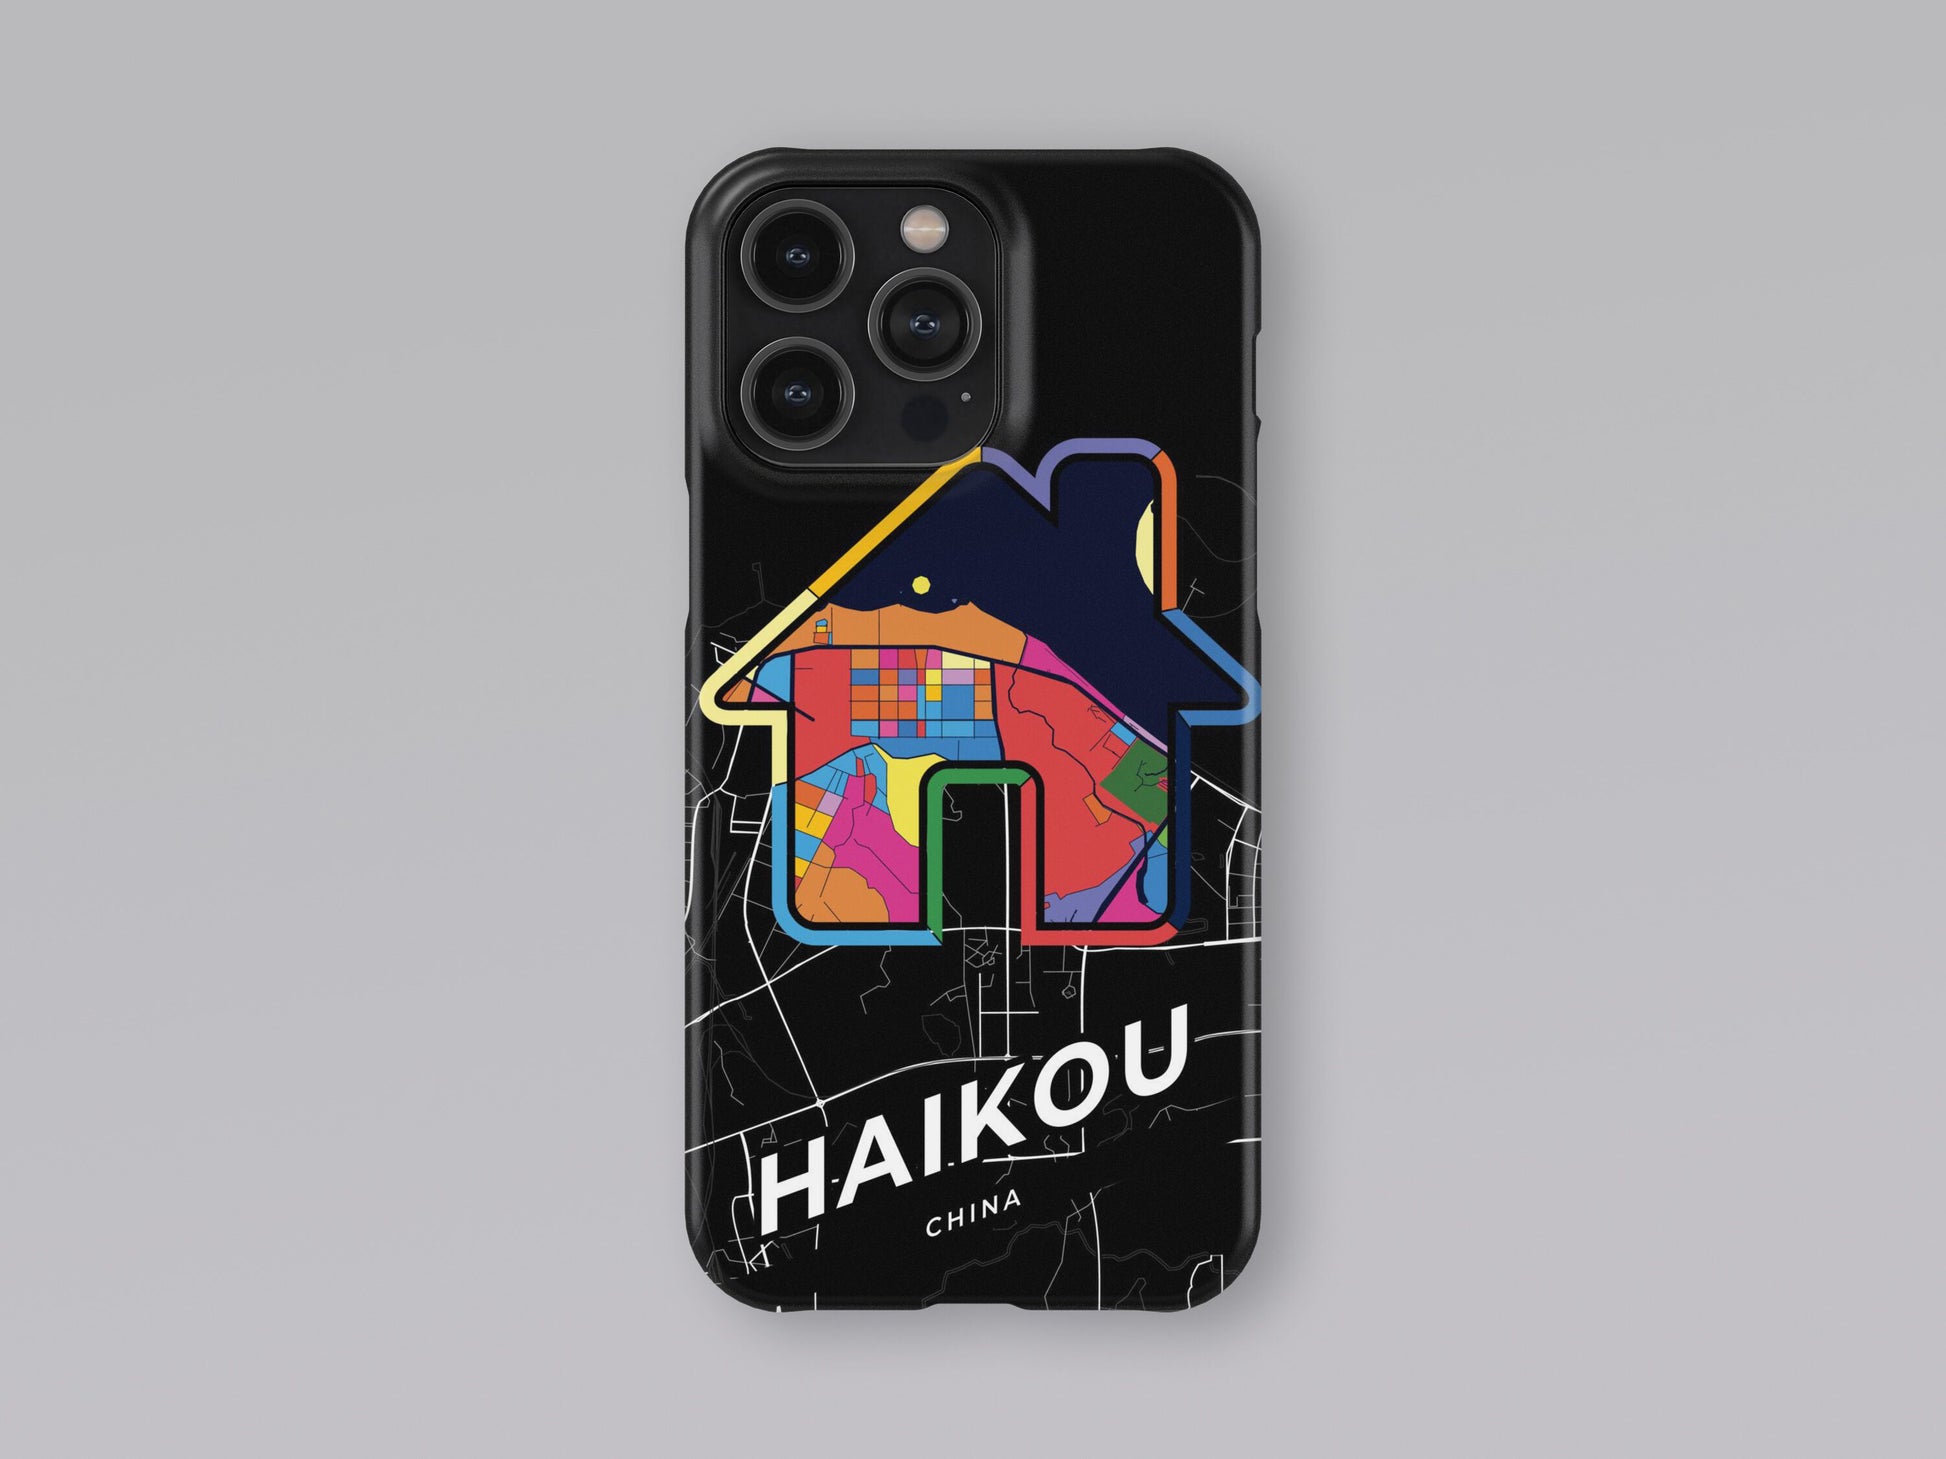 Haikou China slim phone case with colorful icon. Birthday, wedding or housewarming gift. Couple match cases. 3